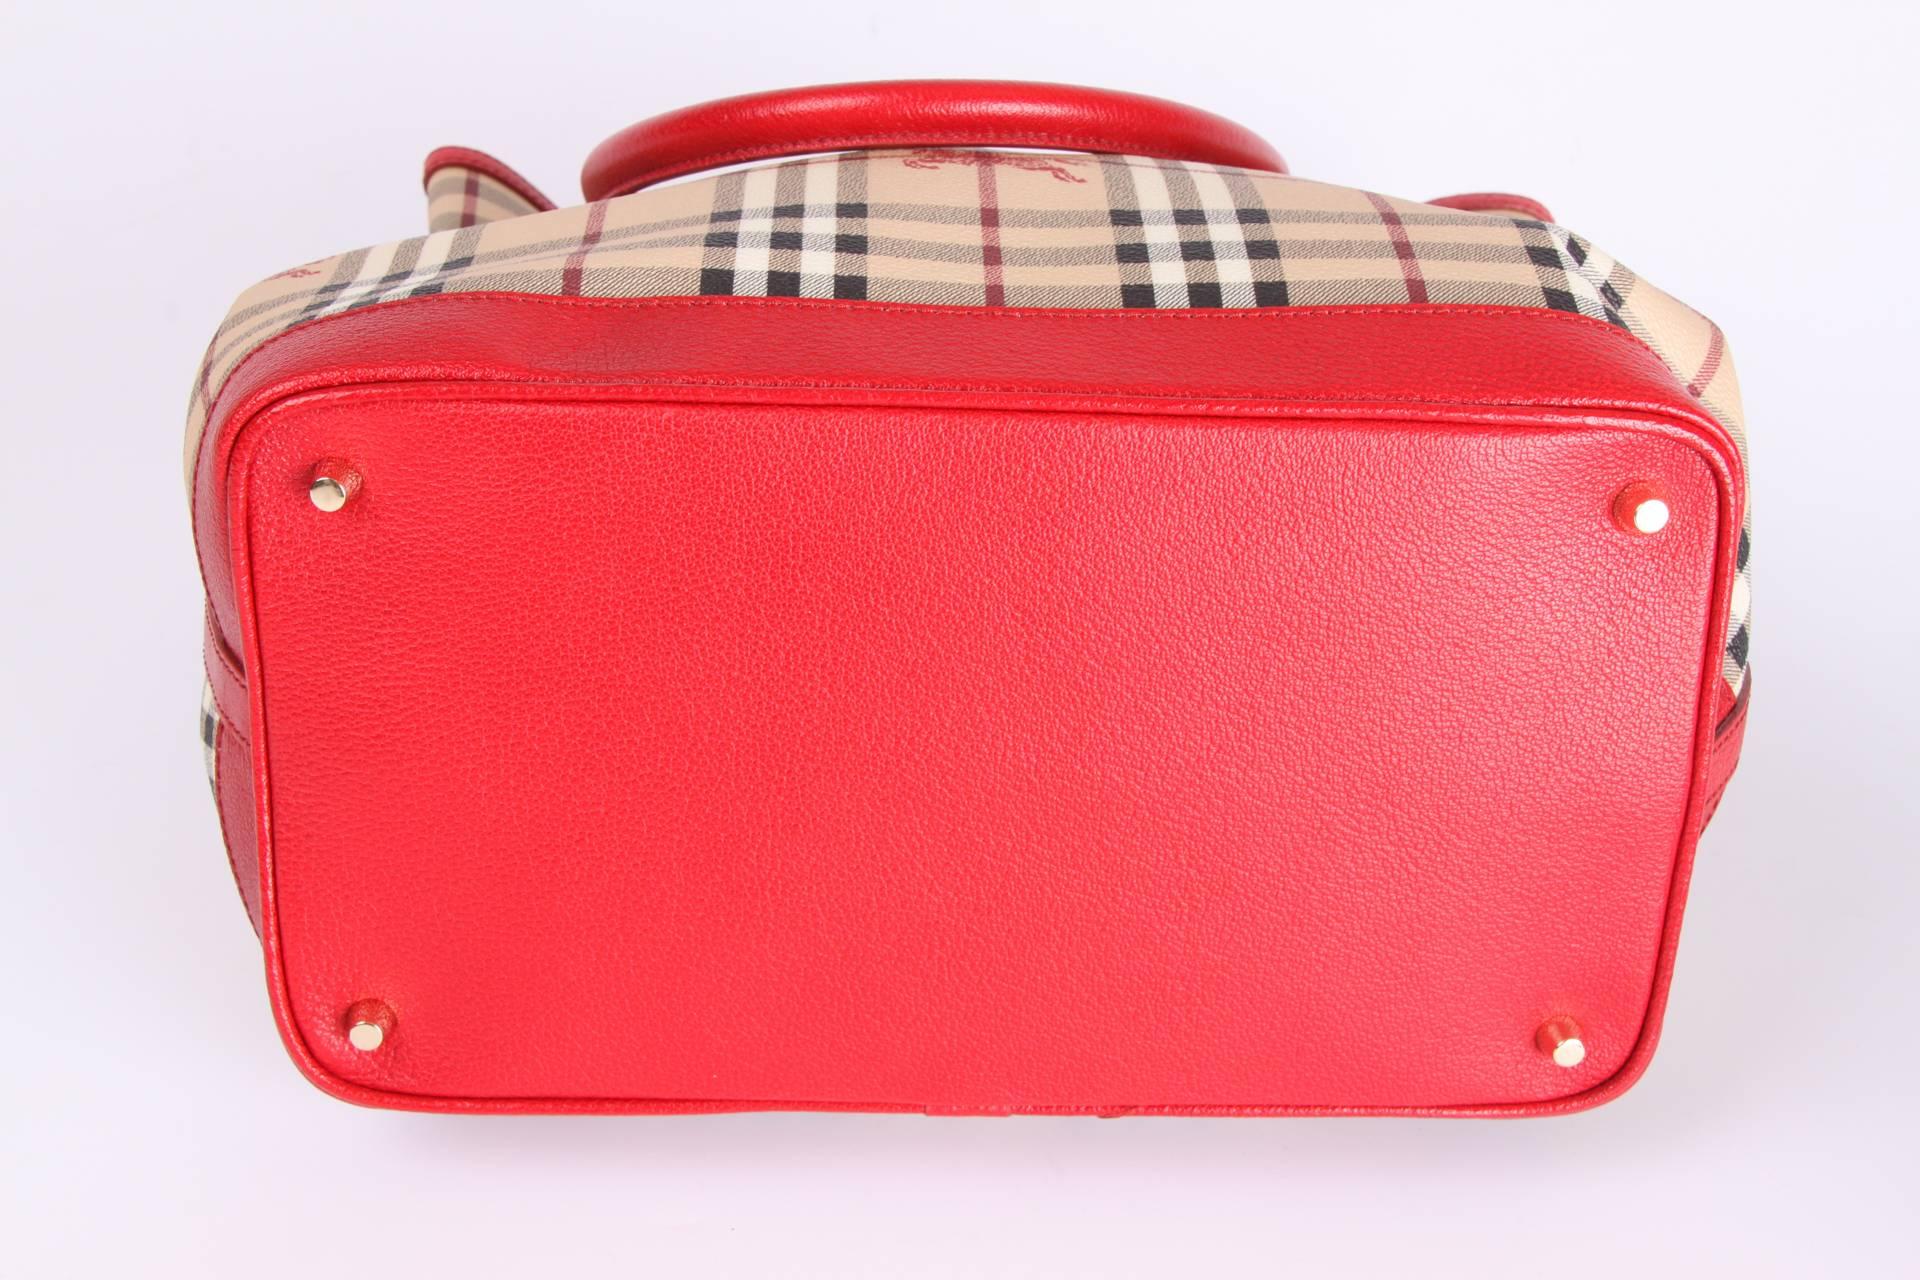 burberry bag with red handle